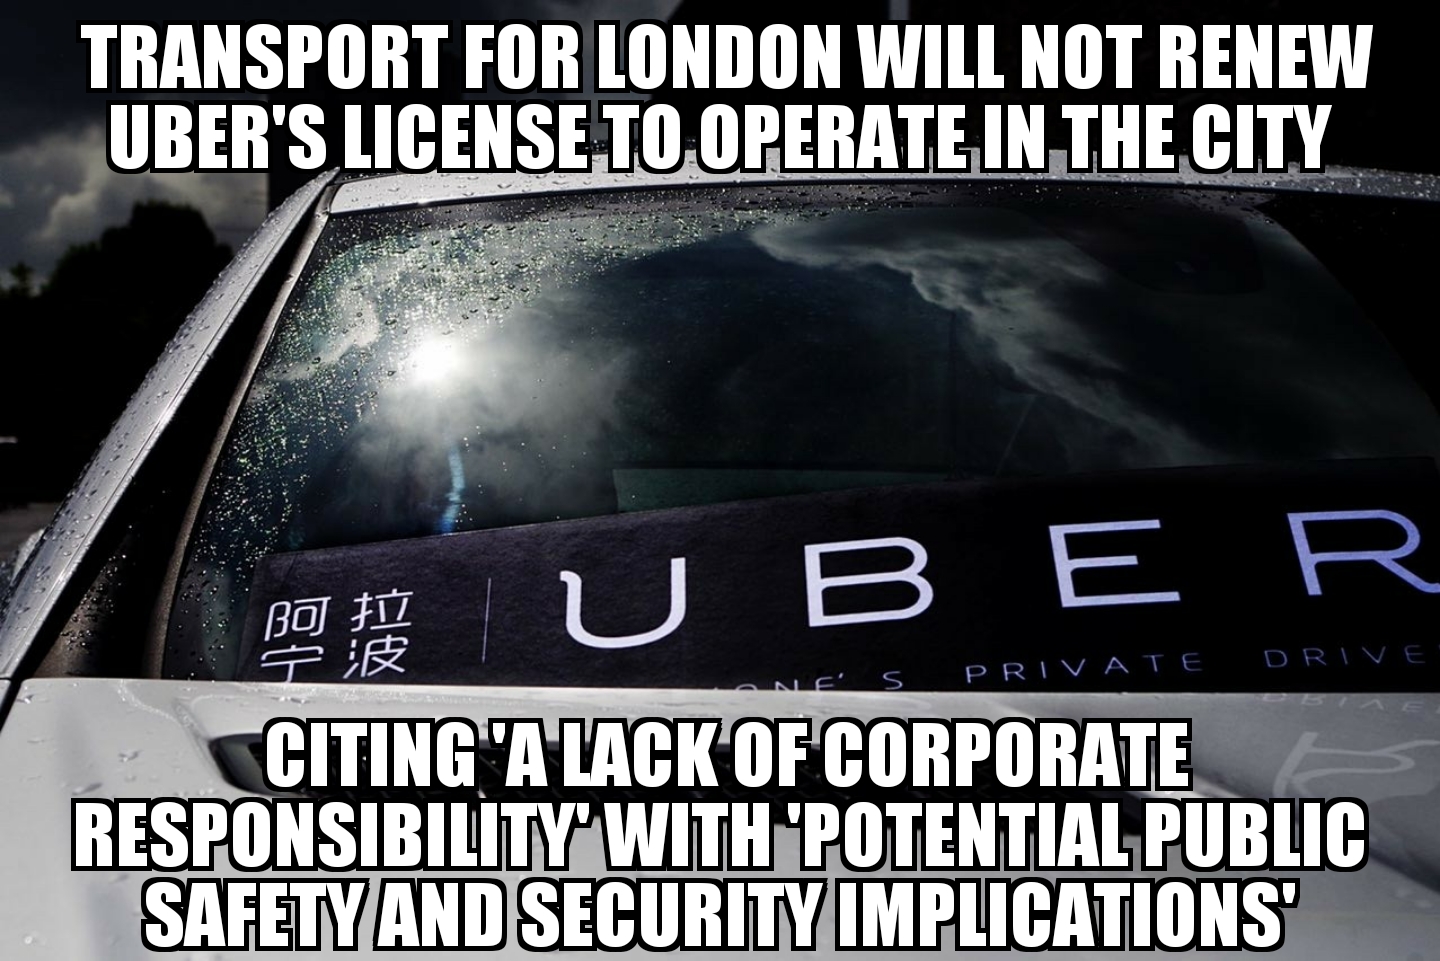 London will not renew Uber’s license to operate